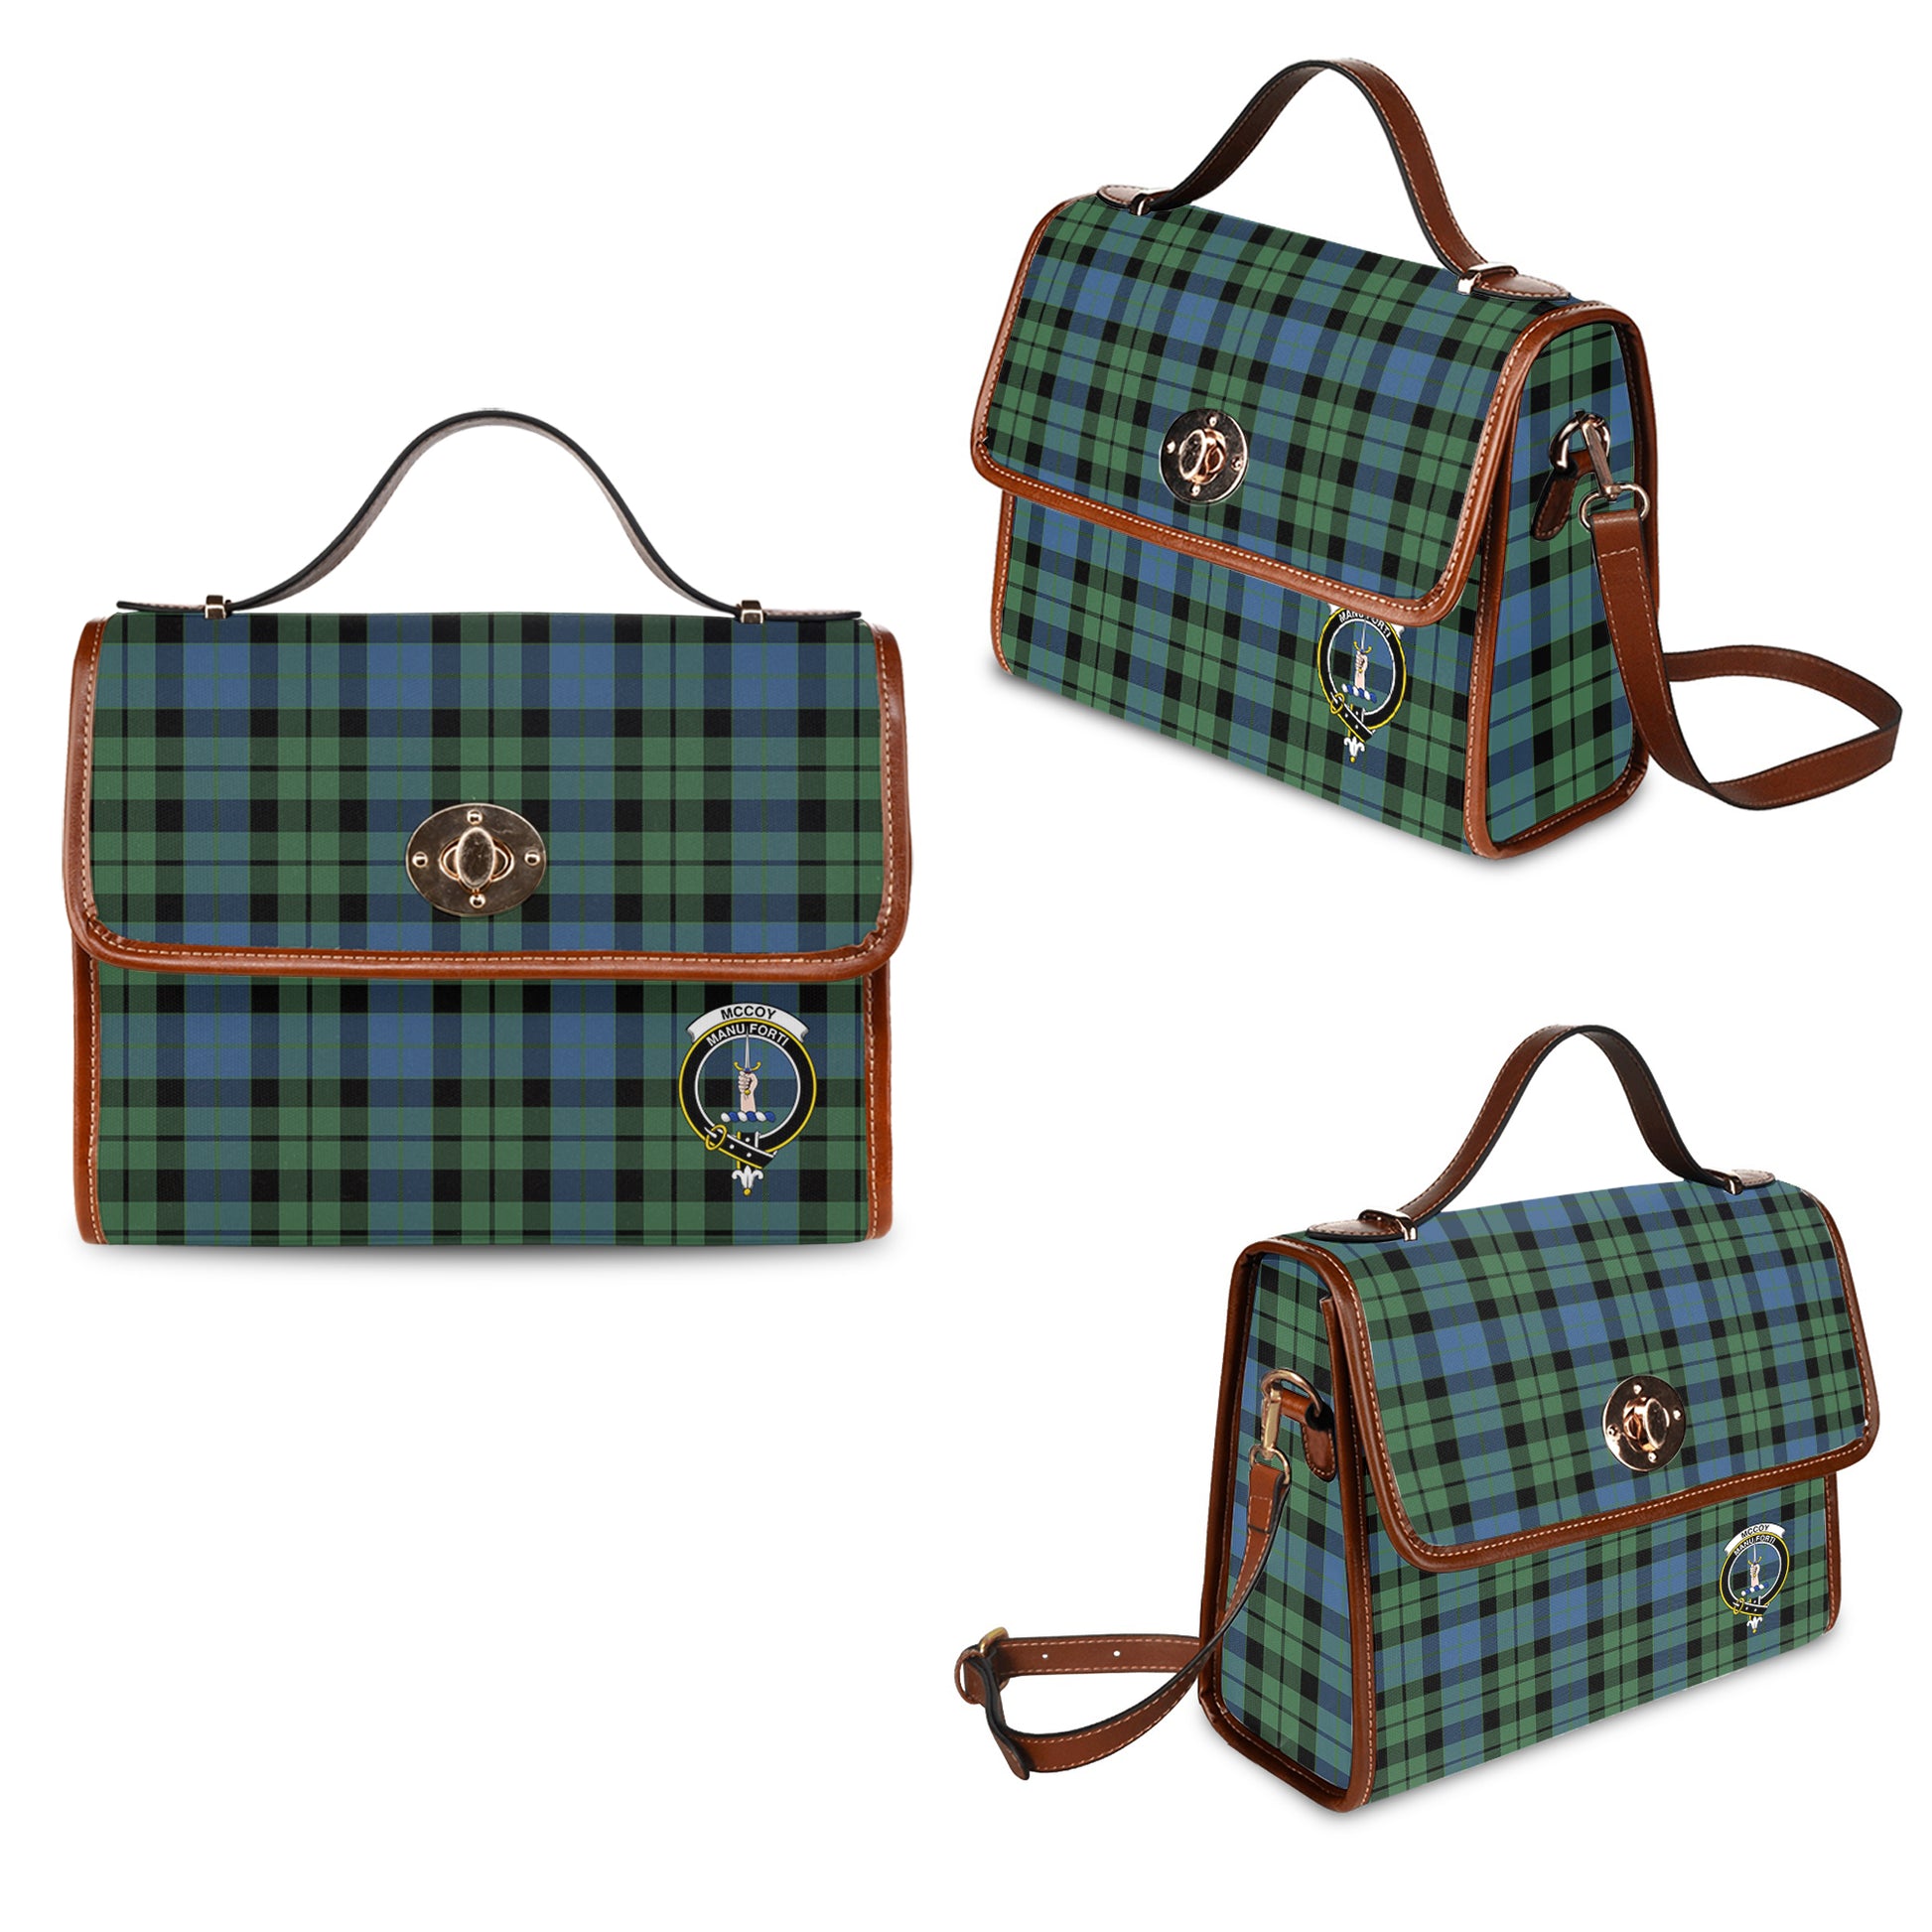 mccoy-ancient-tartan-leather-strap-waterproof-canvas-bag-with-family-crest